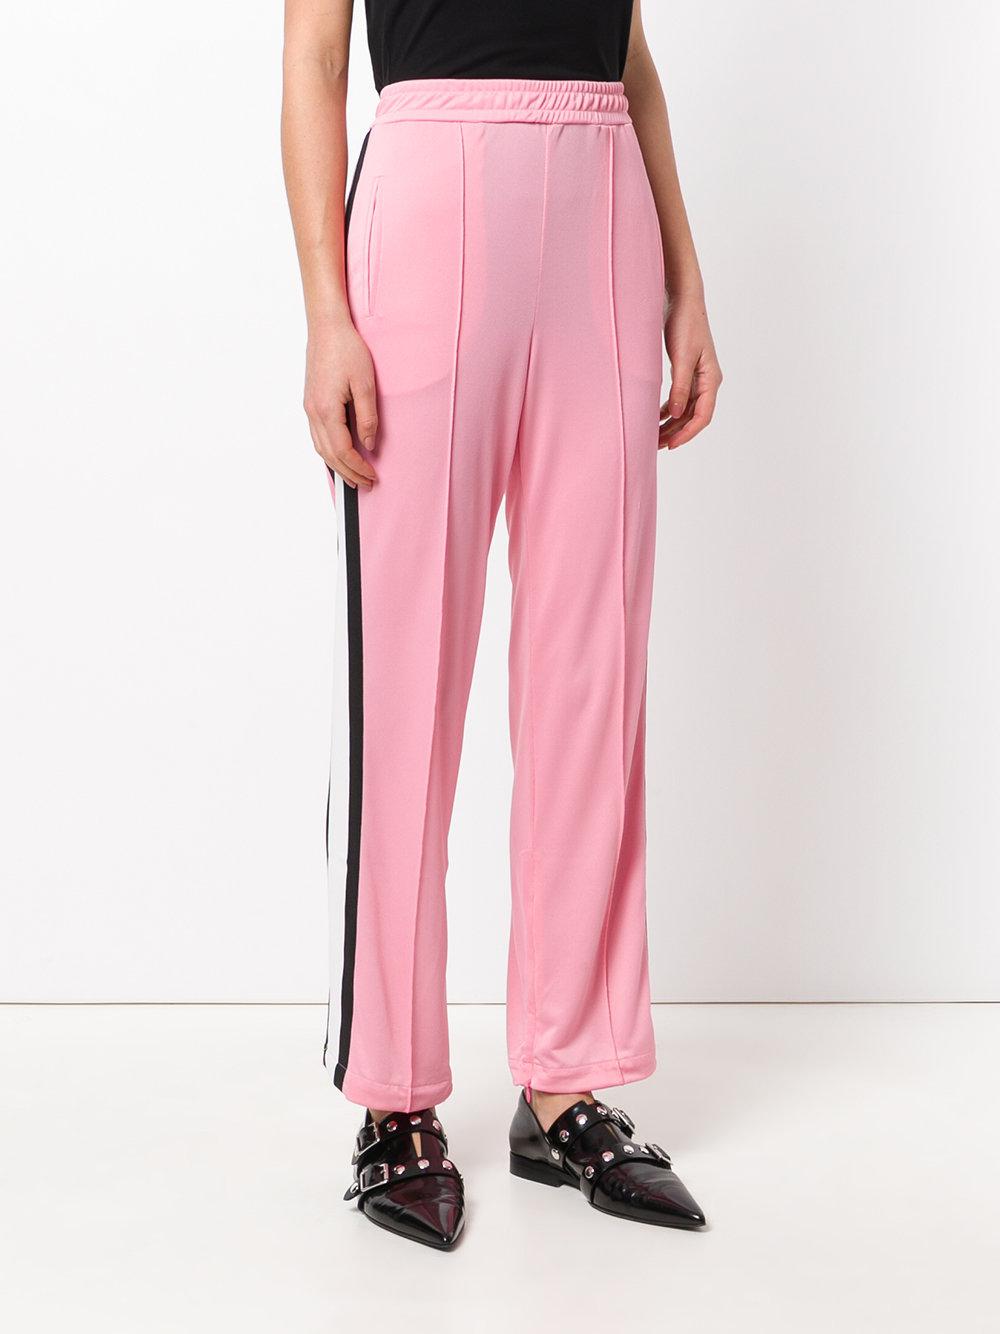 Ganni Synthetic Striped Track Pants in Pink & Purple (Pink) - Lyst